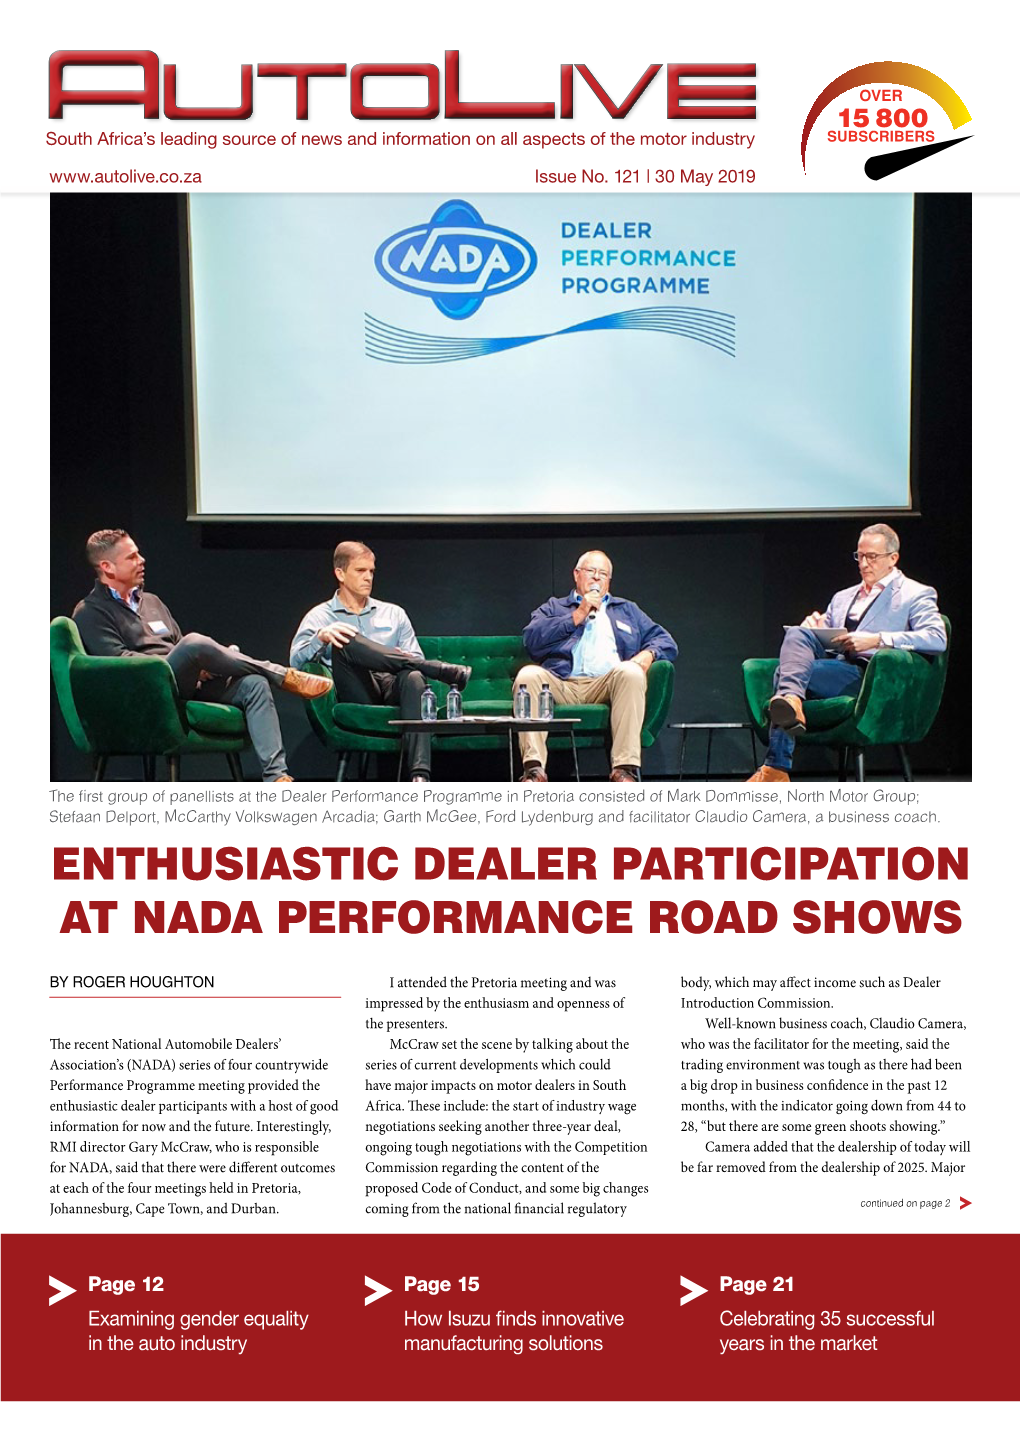 Enthusiastic Dealer Participation at Nada Performance Road Shows